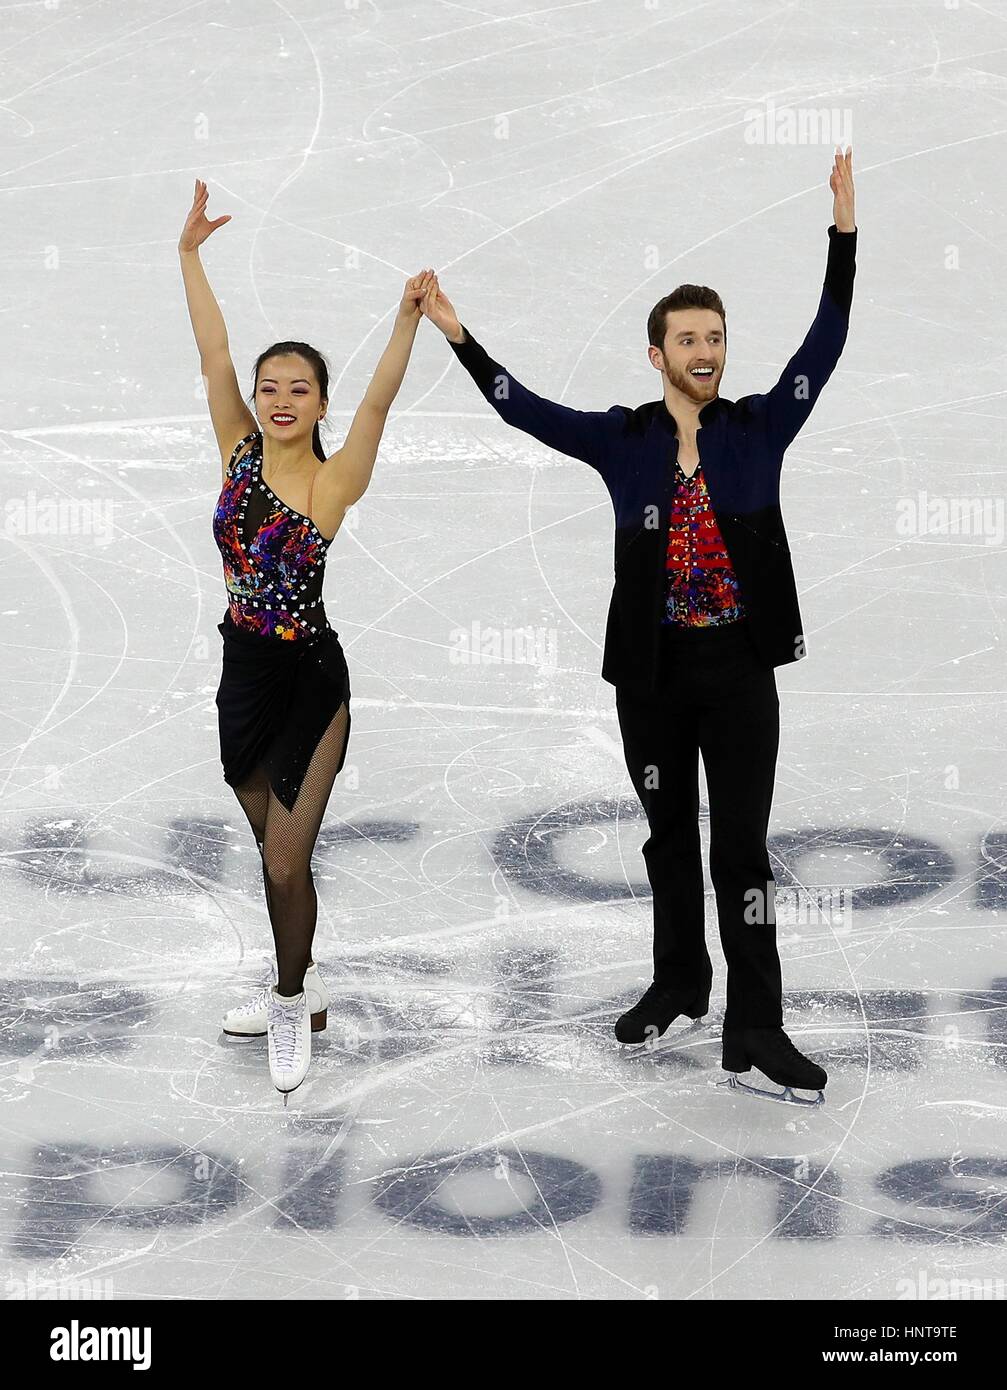 Yura Min and Alexander Gamelin of South Korea compete in the Pairs Short Program during ISU Four Continents Figure Skating Championships Test Event For PyeongChang 2018 Winter Olympics at Gangneung Ice Arena February 16, 2017 in Gangneung, South Korea. The event is being held one year before the start of the 2018 Winter Olympic Games in PyeongChang.   (Jeon Han/Koreanet via Planetpix) Stock Photo